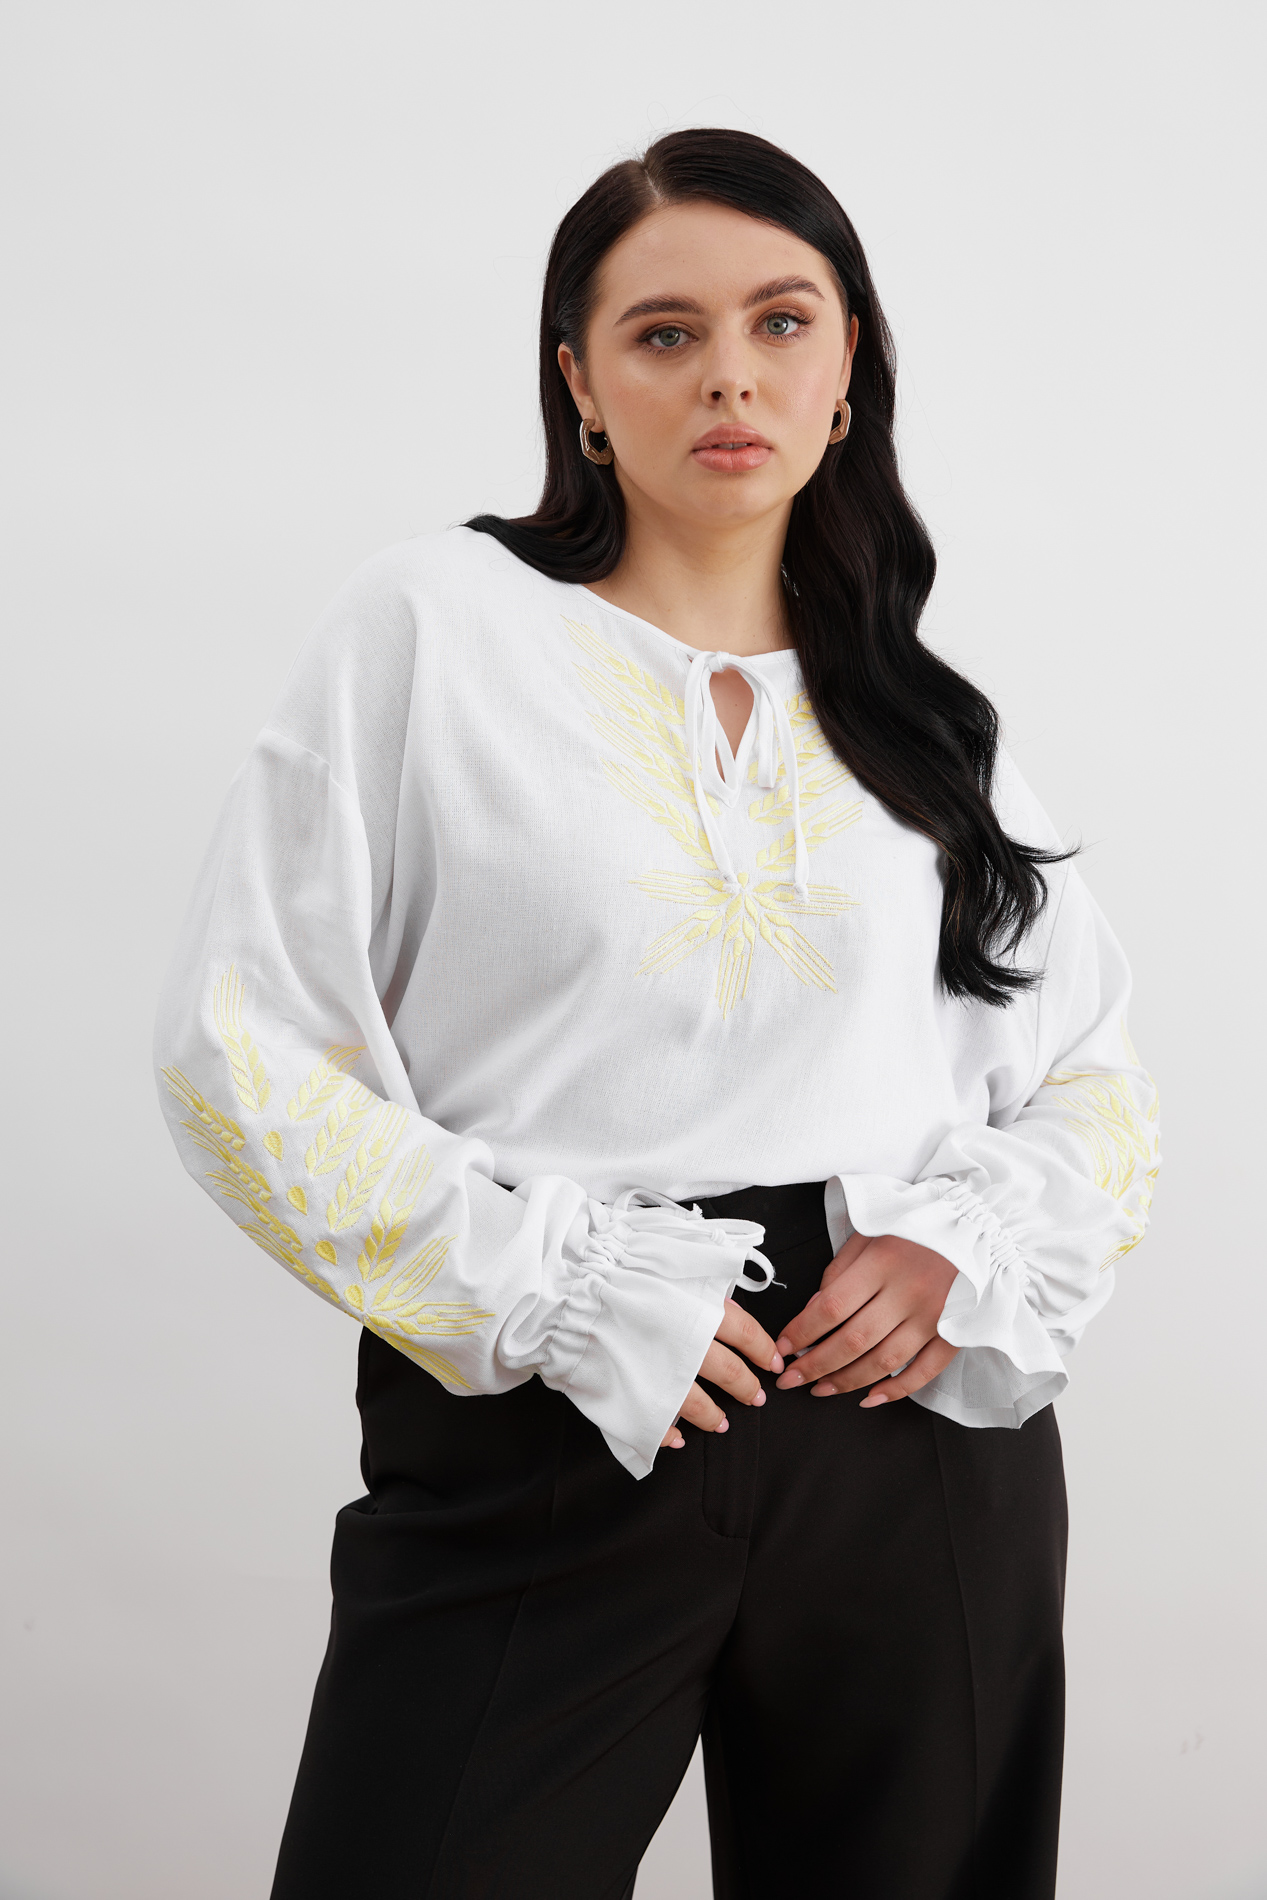 Buy Embroidered white shirt with golden designer ornament plus size: shirt,  white color, linen, casual style, buy in VOVK online store for 3190 UAH.